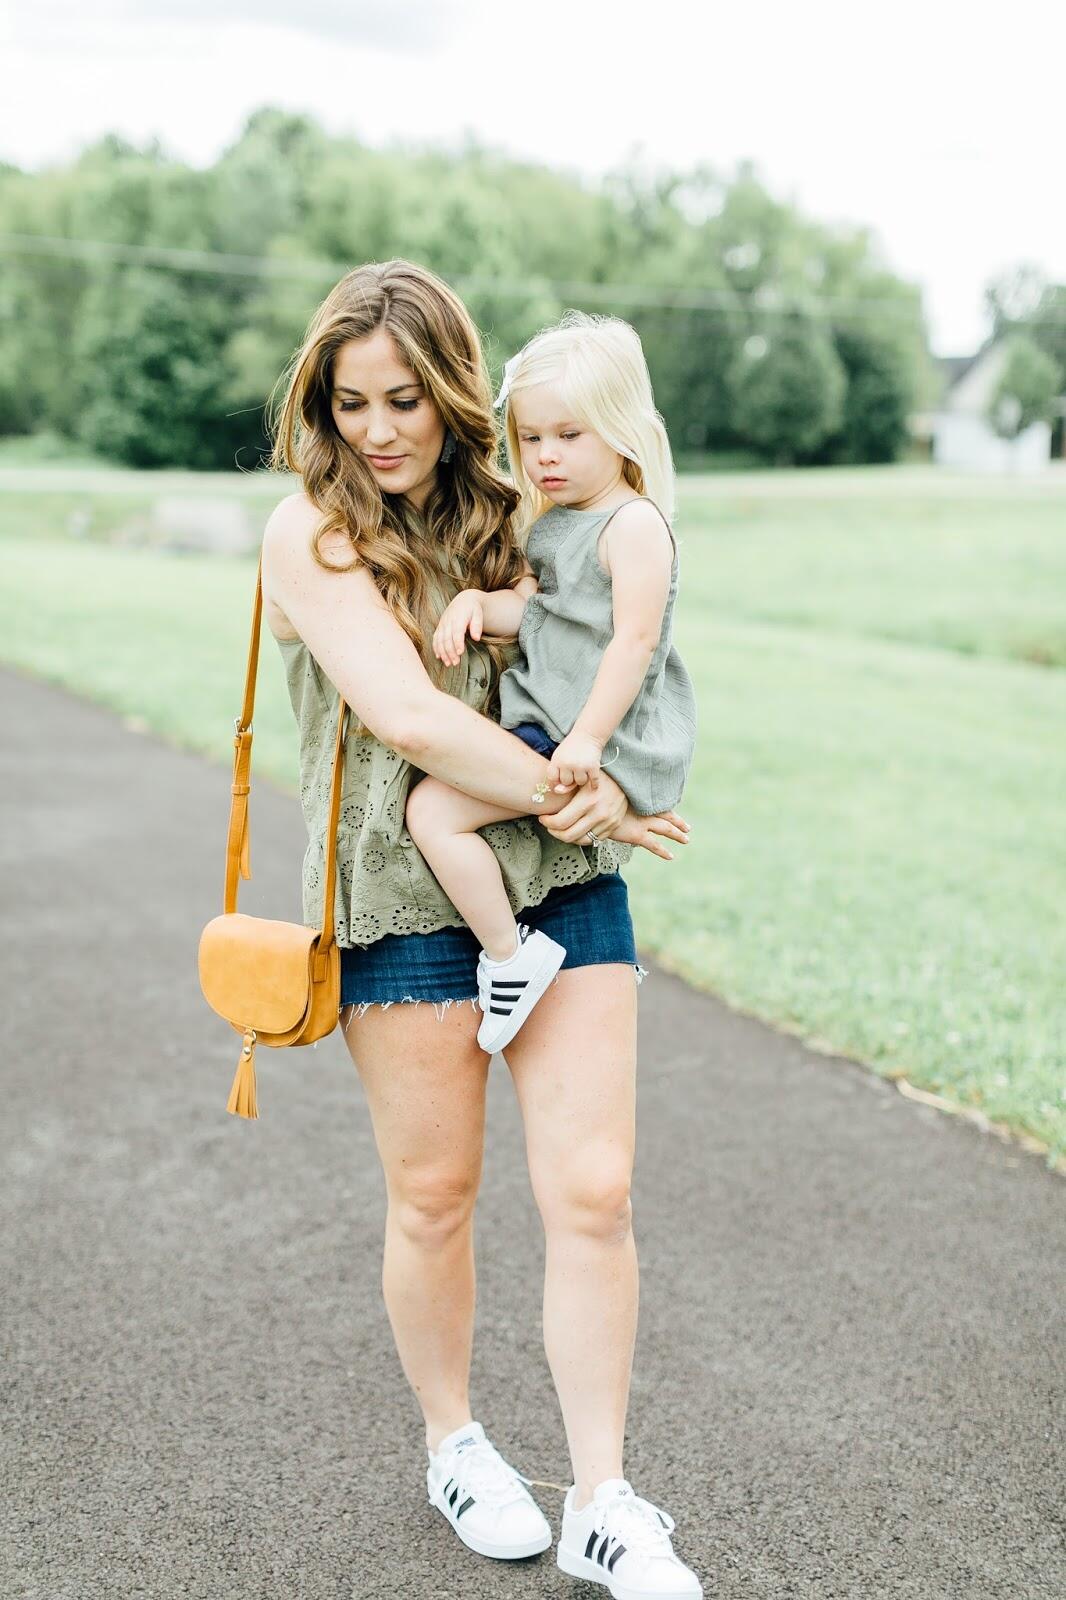 Where to Buy Affordable Casual Summer Clothing for Kids & Moms by fashion blogger Laura of Walking in Memphis in High Heels